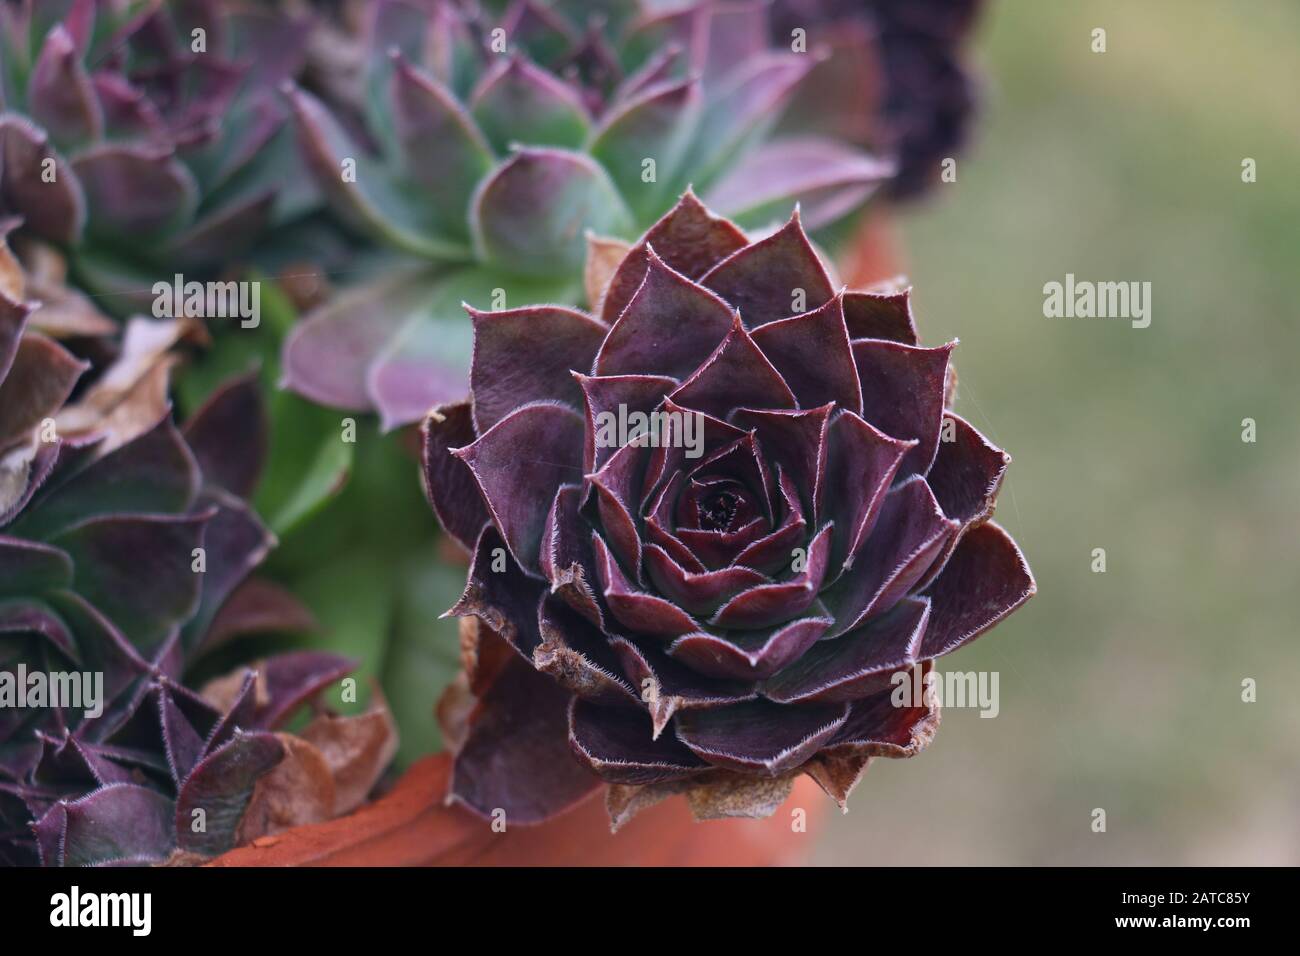 Sempervivum succulent red violet rosette clinging away pointed leaves artichoke-like changes color in season often called 'violet queen' purple beauty Stock Photo